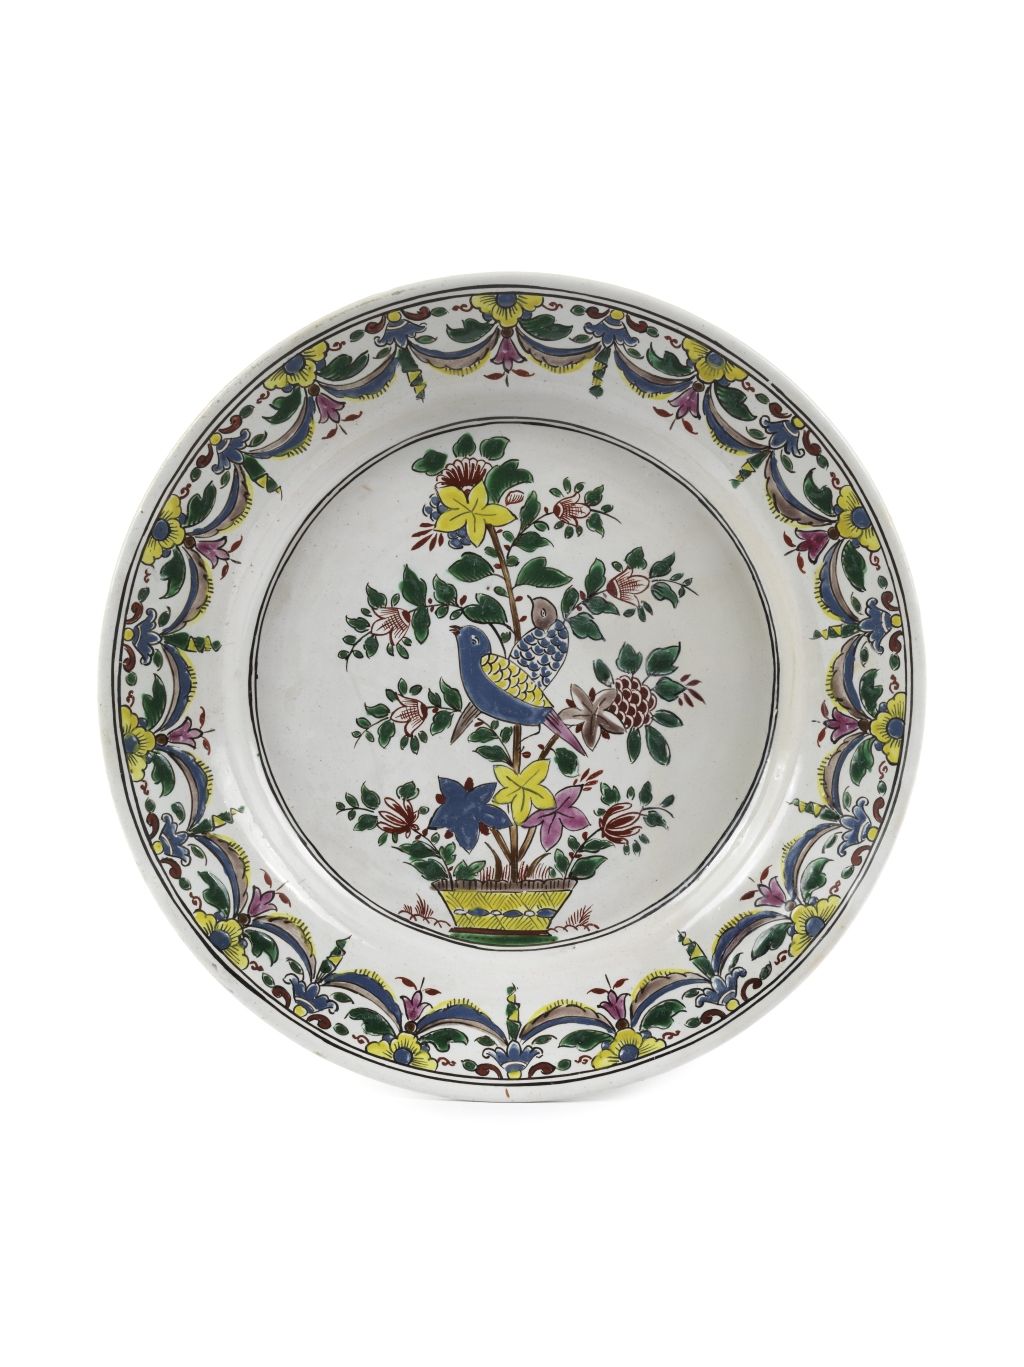 18th-century-faience-plate-ansbach-famille-verte